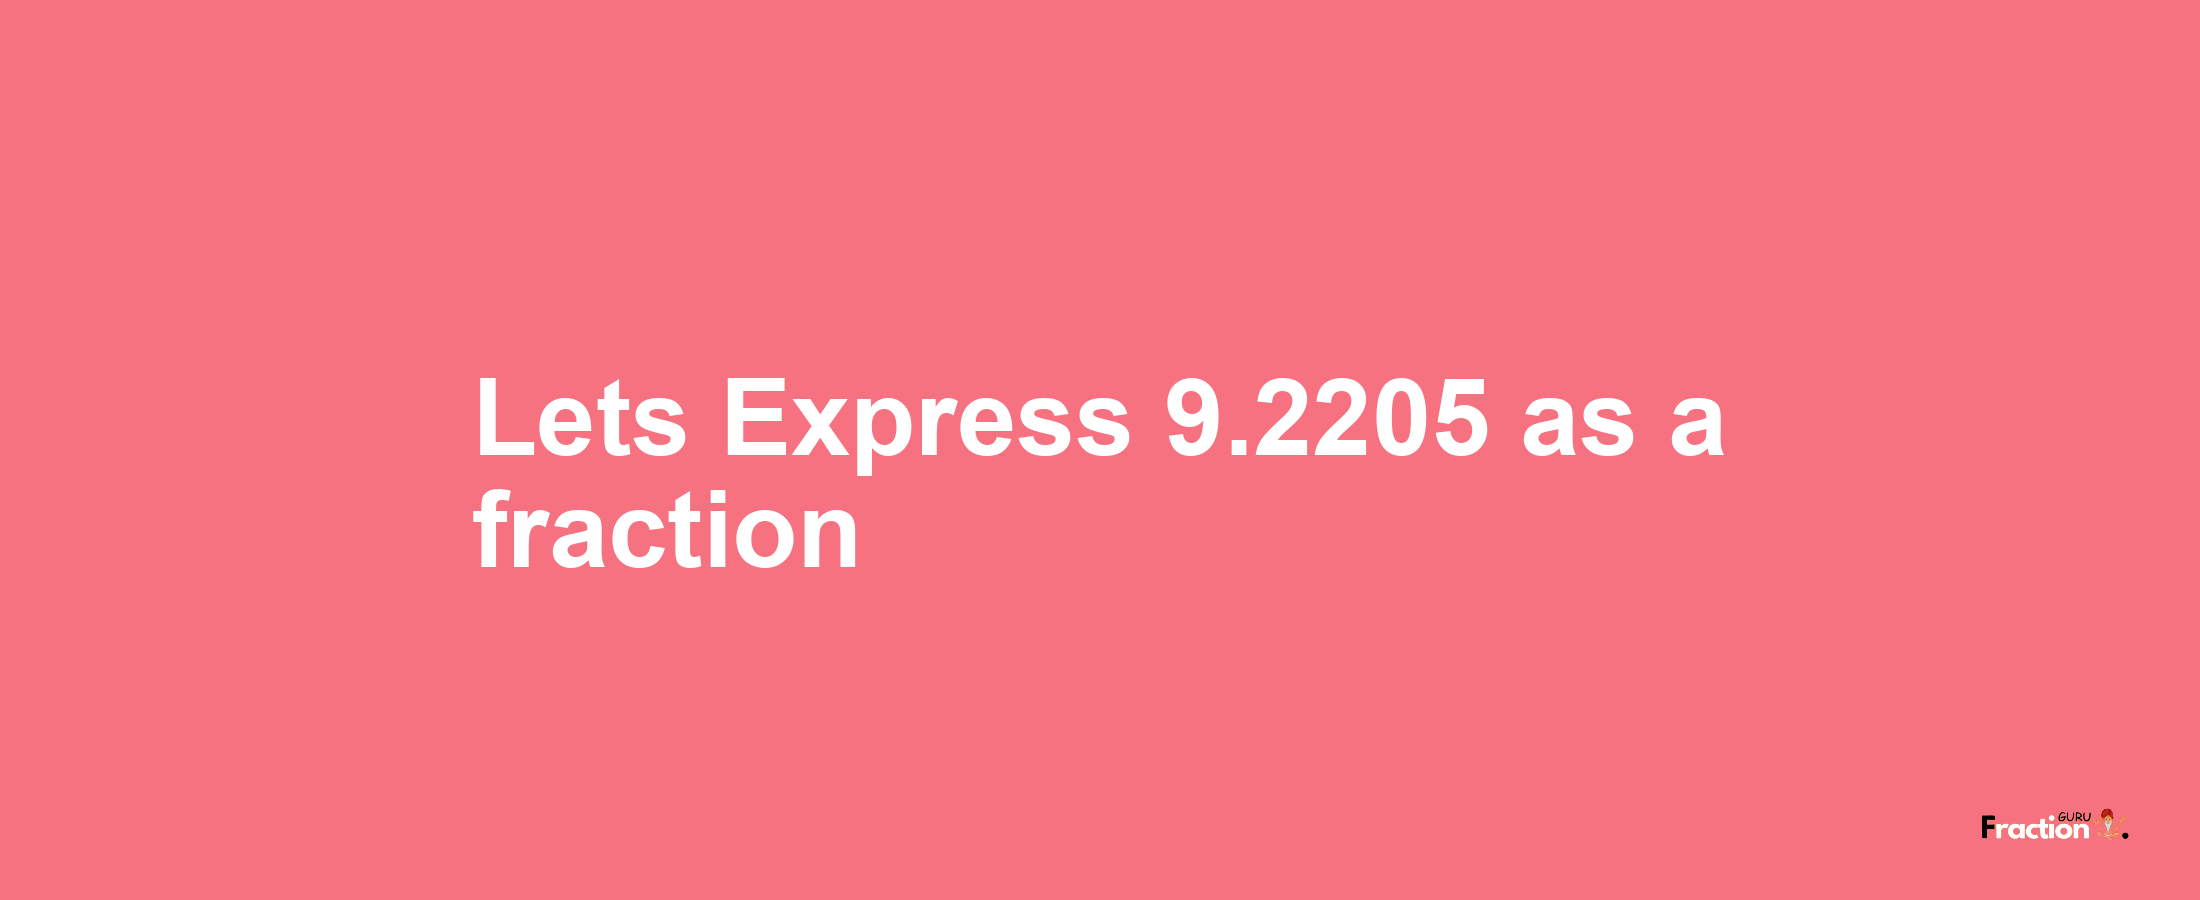 Lets Express 9.2205 as afraction